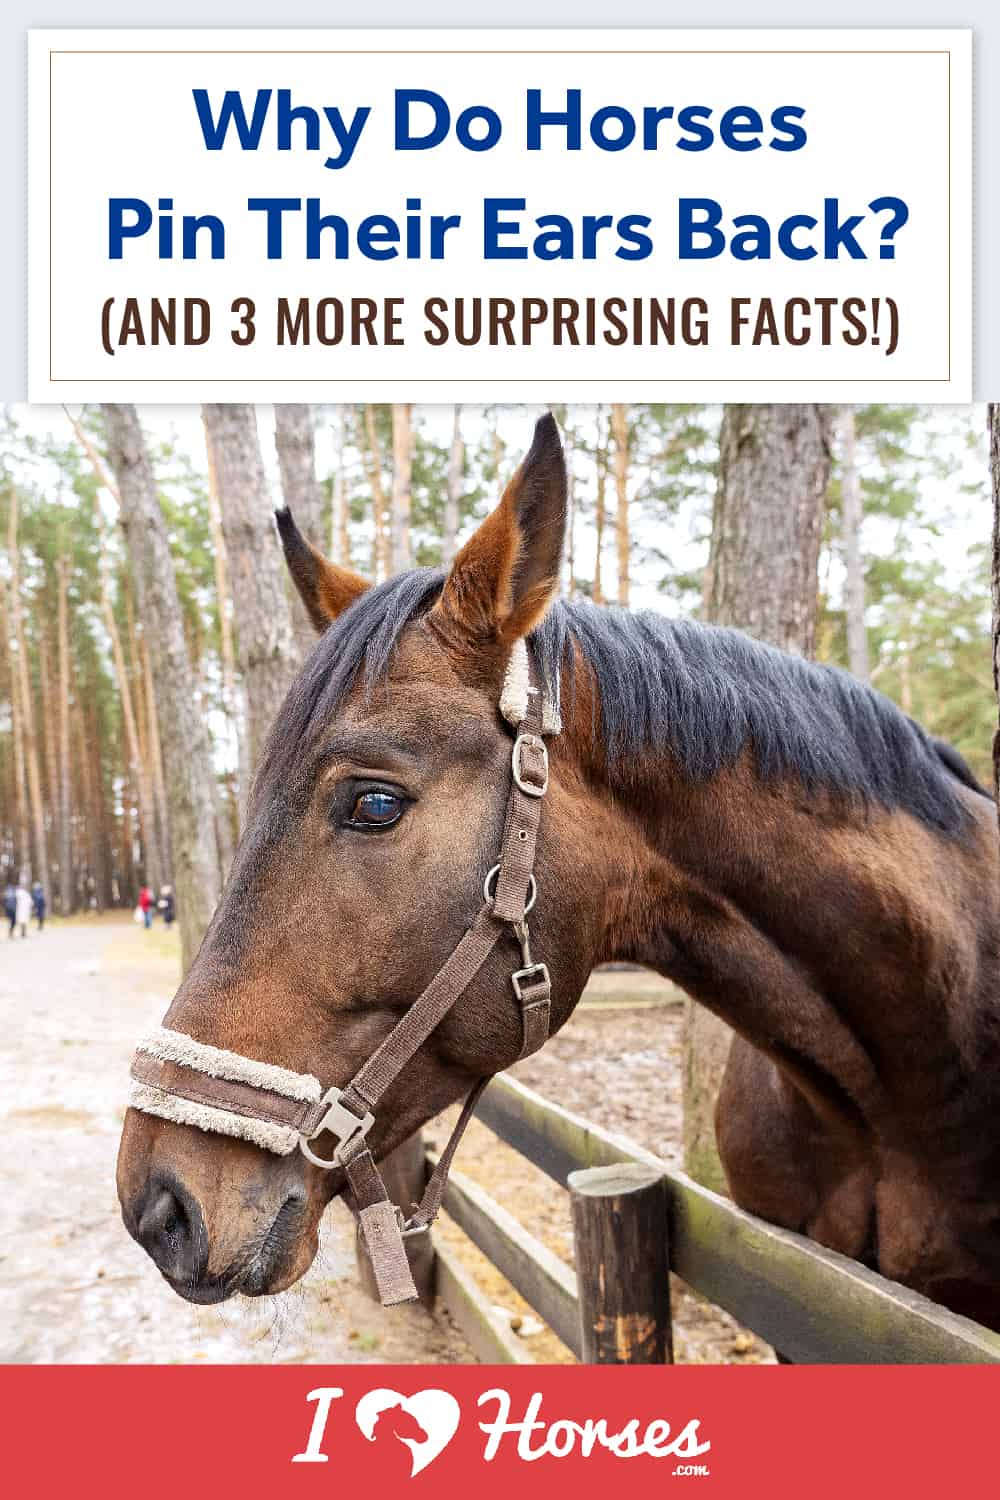 How To Read Your Horse's Ears